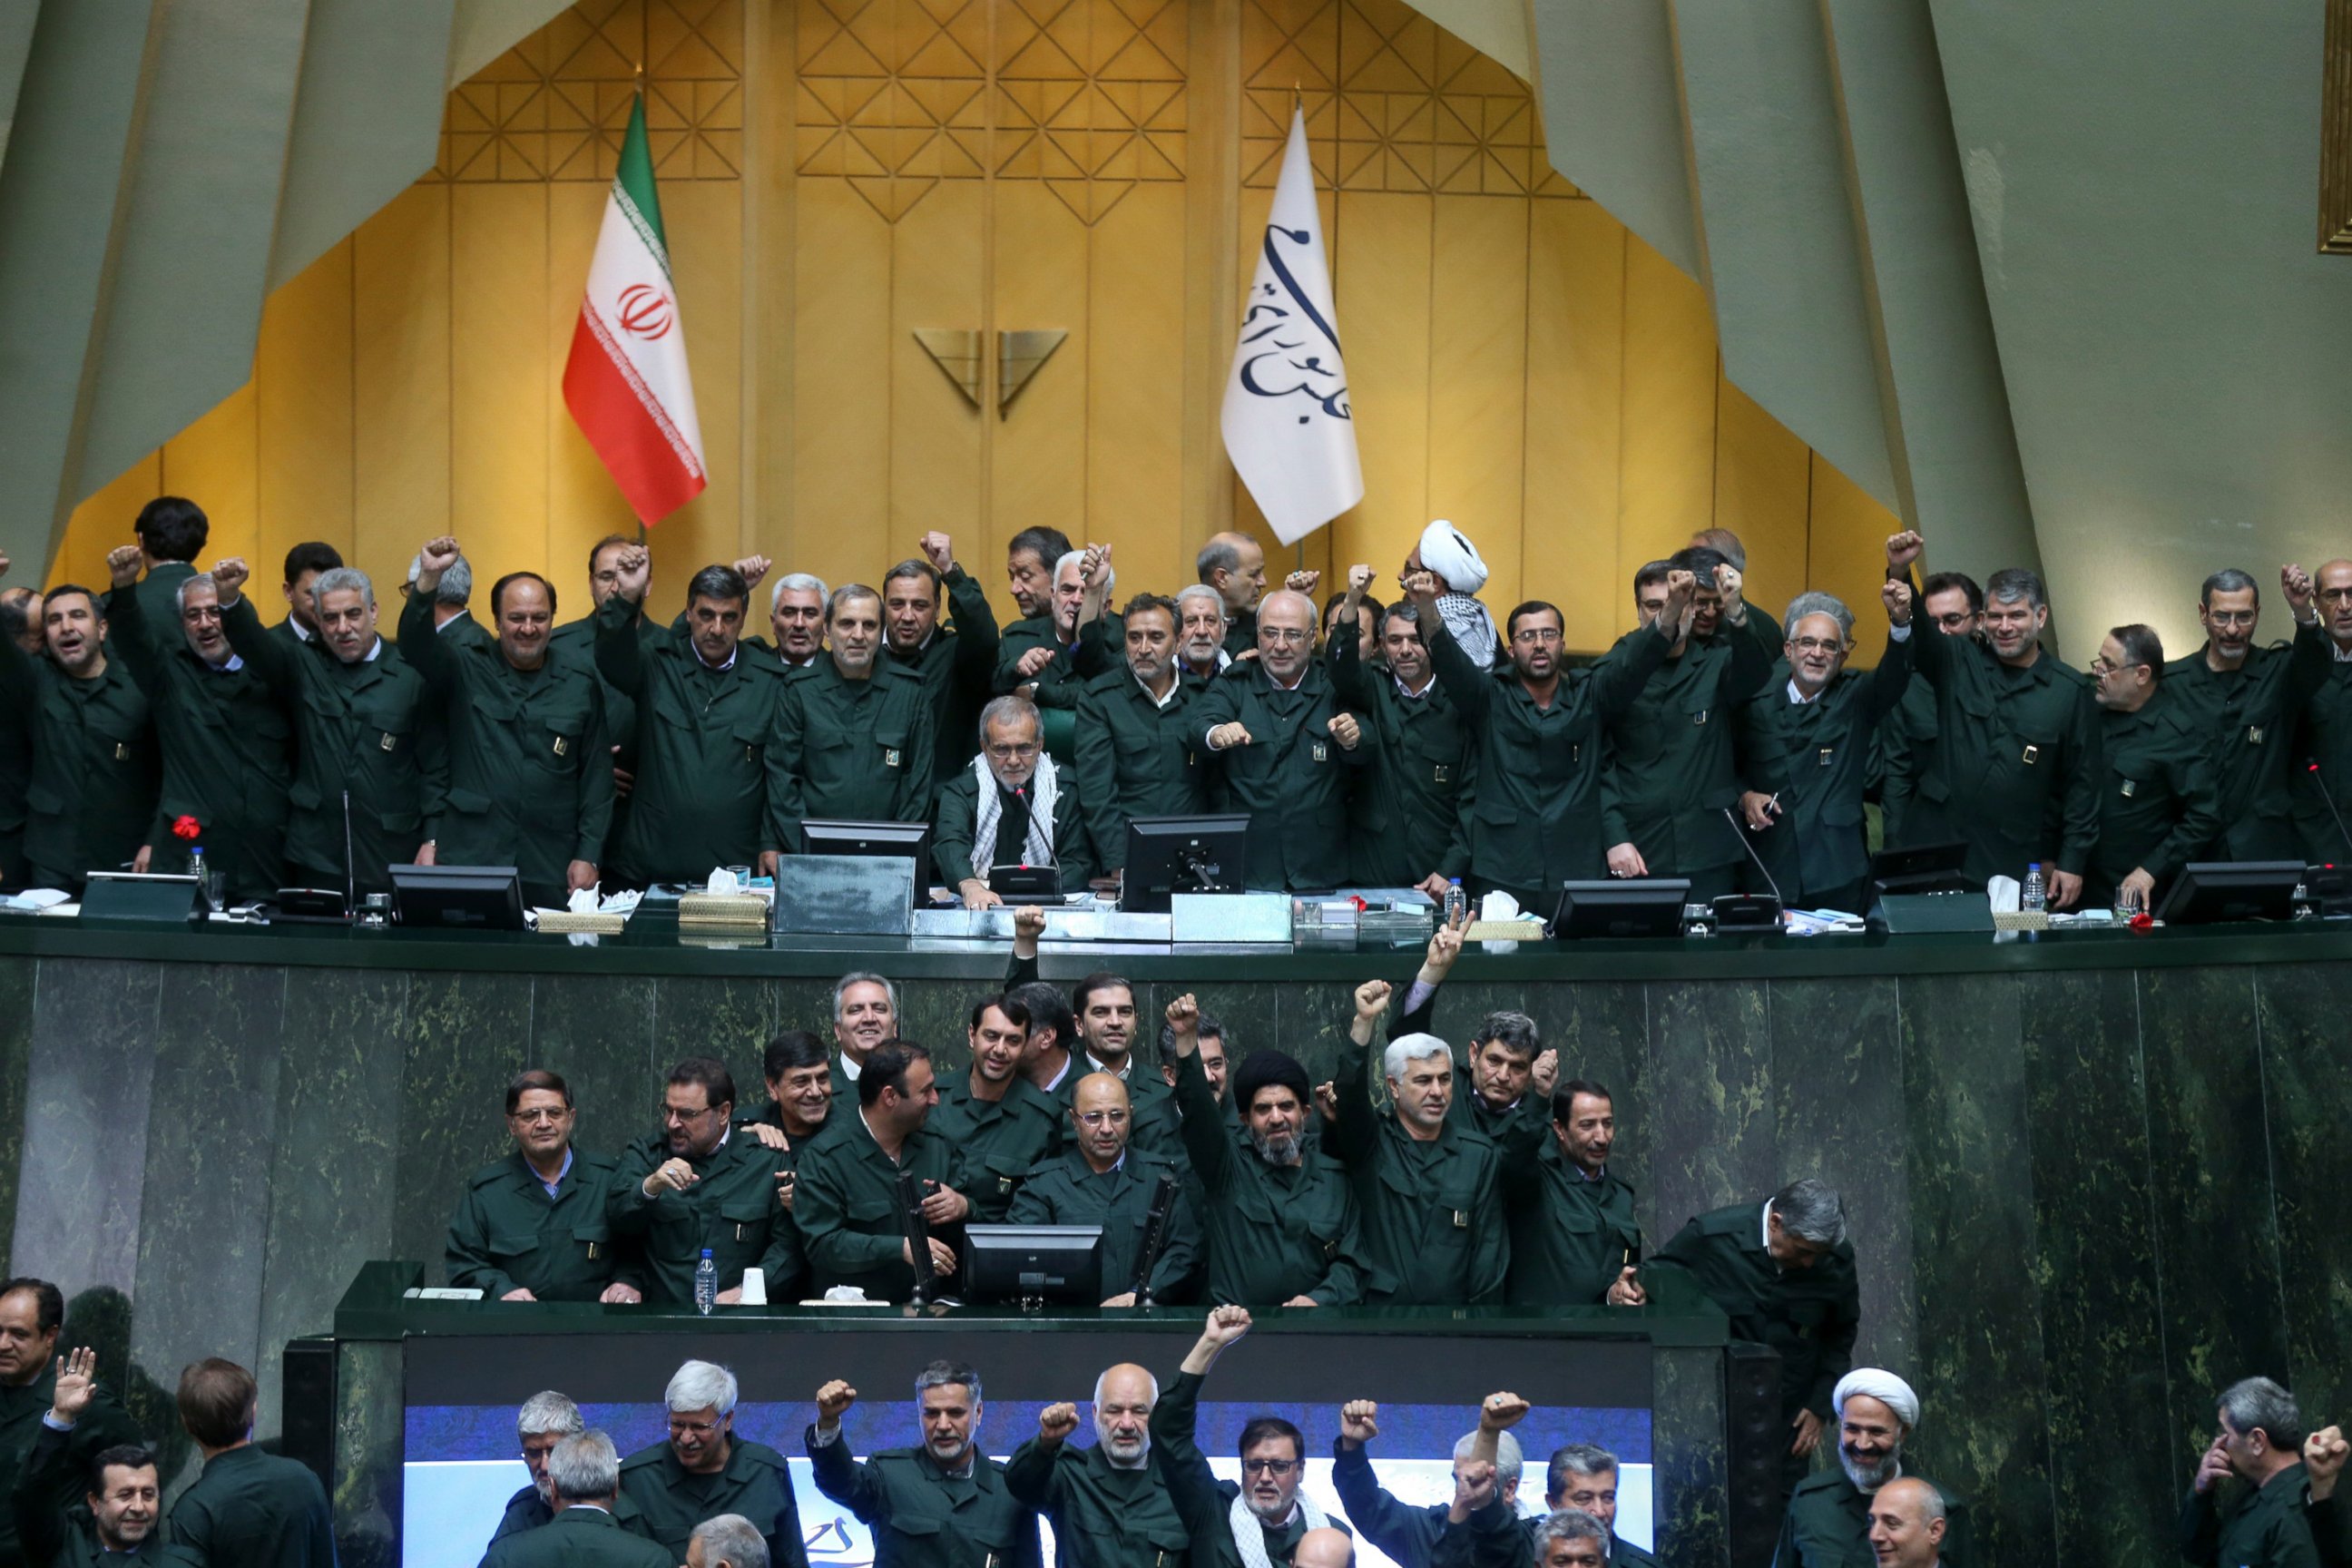 PHOTO: Wearing the uniform of the Iranian Revolutionary Guard, lawmakers chant slogans during an open session of parliament in Tehran, Iran, Tuesday, April 9, 2019.